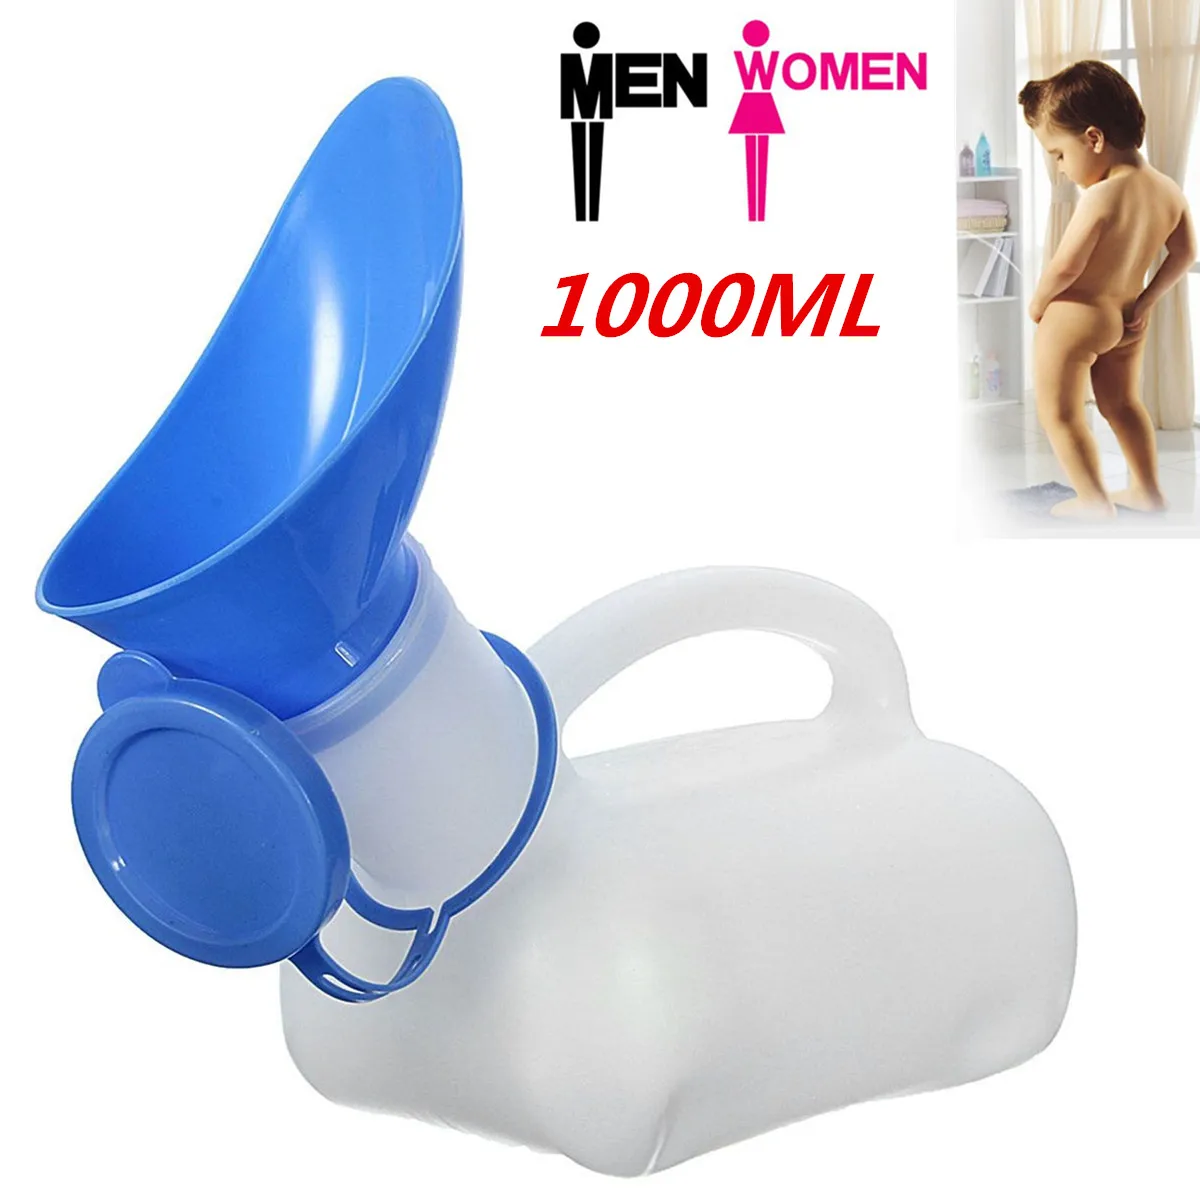 Car Mobile Toilet,Portable Urinal for Camping Outdoor Travel Woman Urine collector,Potty Urinal,Bedpans Pee Bottle with a Lid